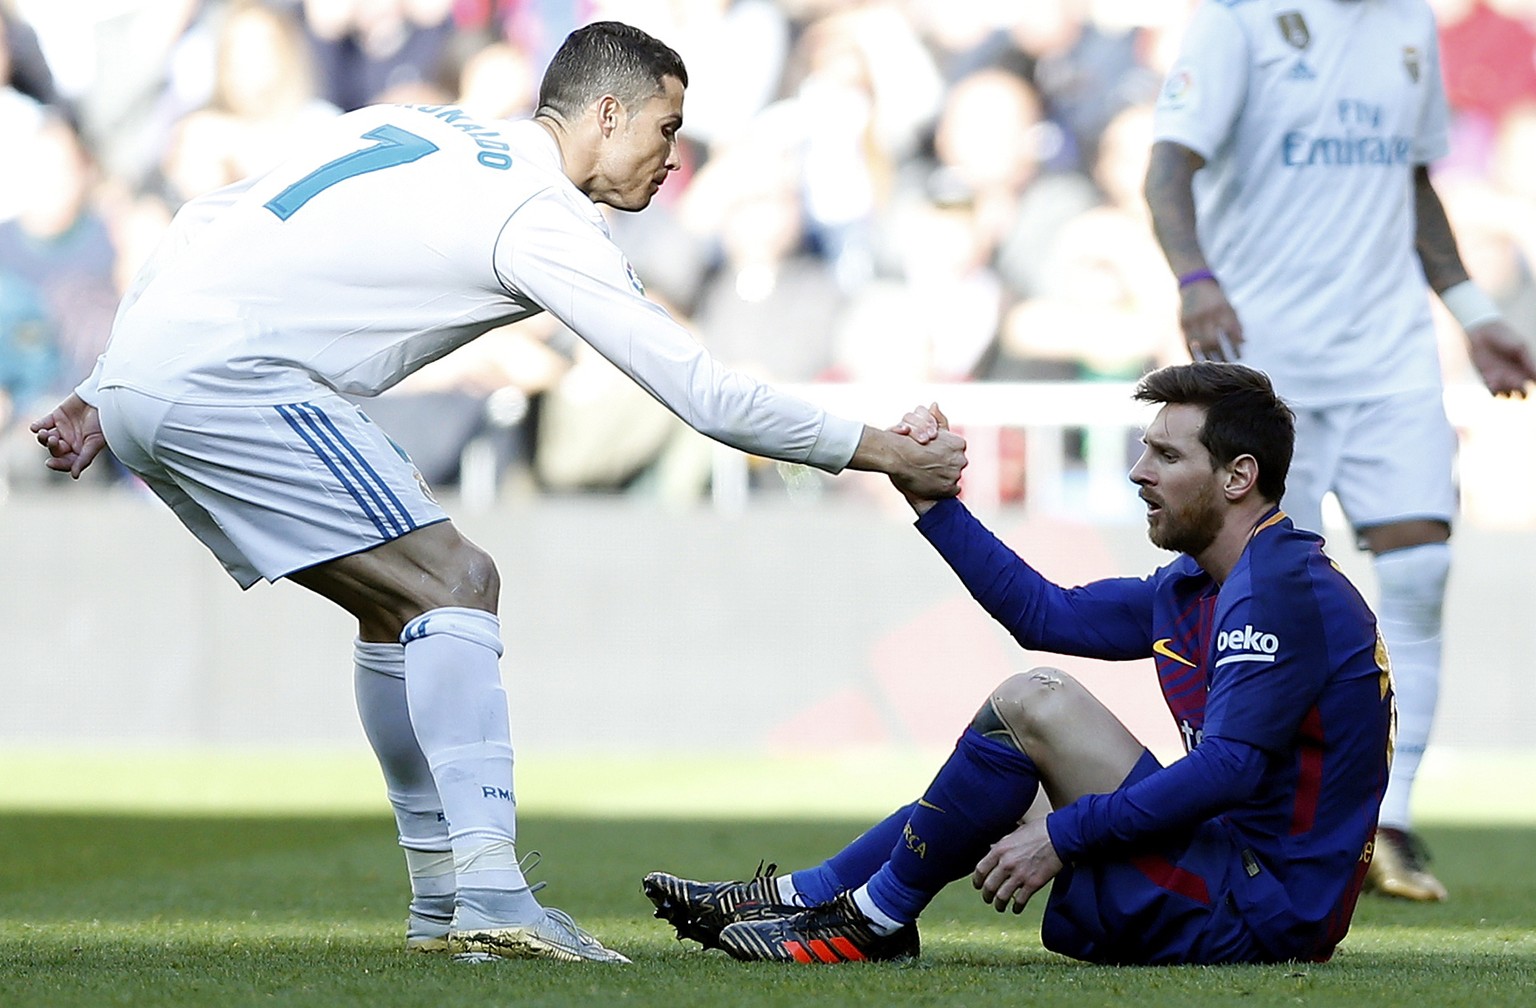 Real Madrid&#039;s Cristiano Ronaldo, left, helps Barcelona&#039;s Lionel Messi get back on his feet during the Spanish La Liga soccer match between Real Madrid and Barcelona at the Santiago Bernabeu  ...